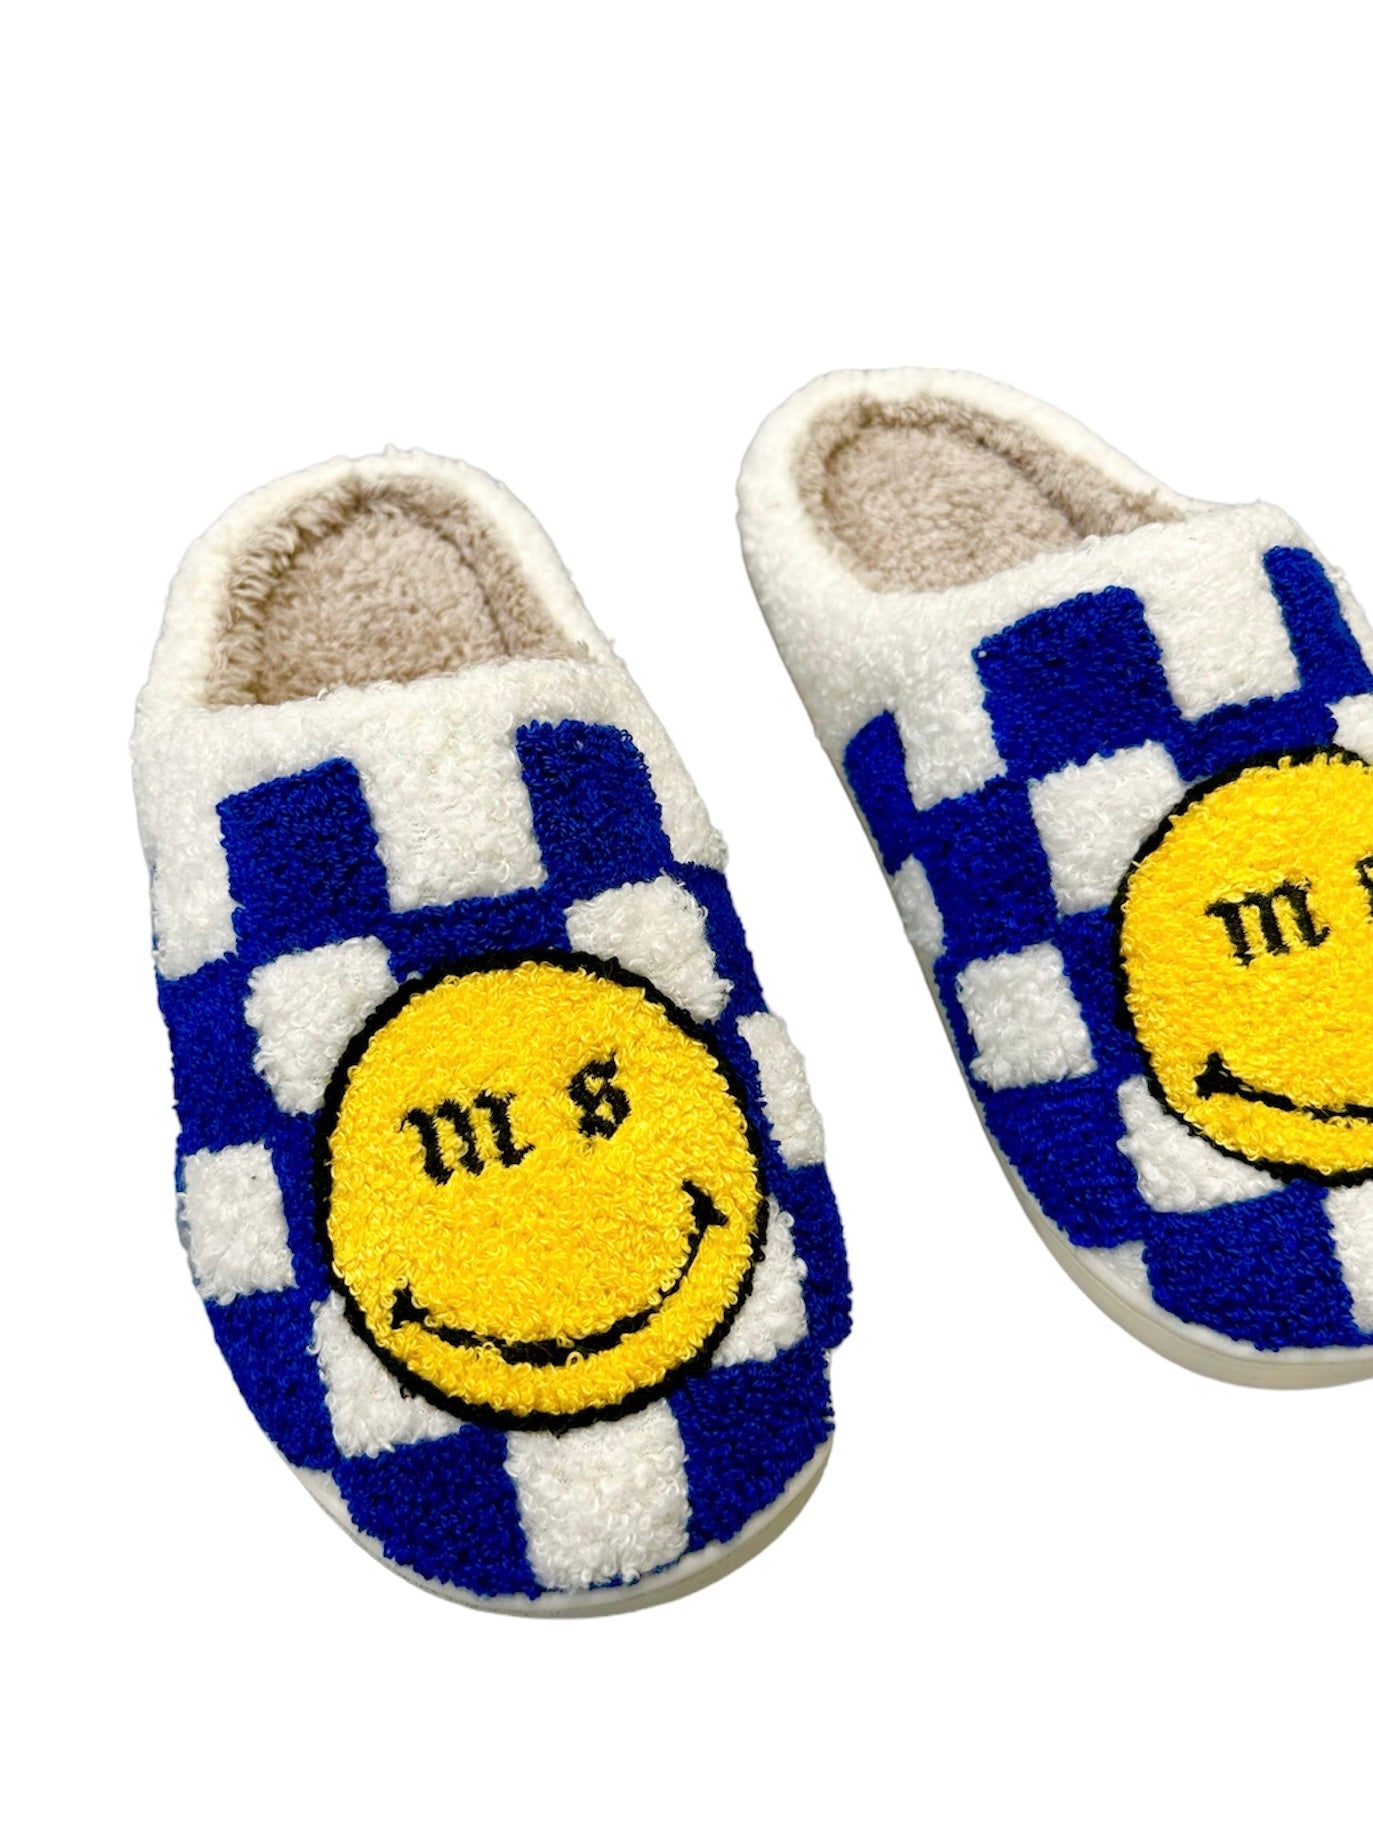 Cobalt Check Smiley slippers.